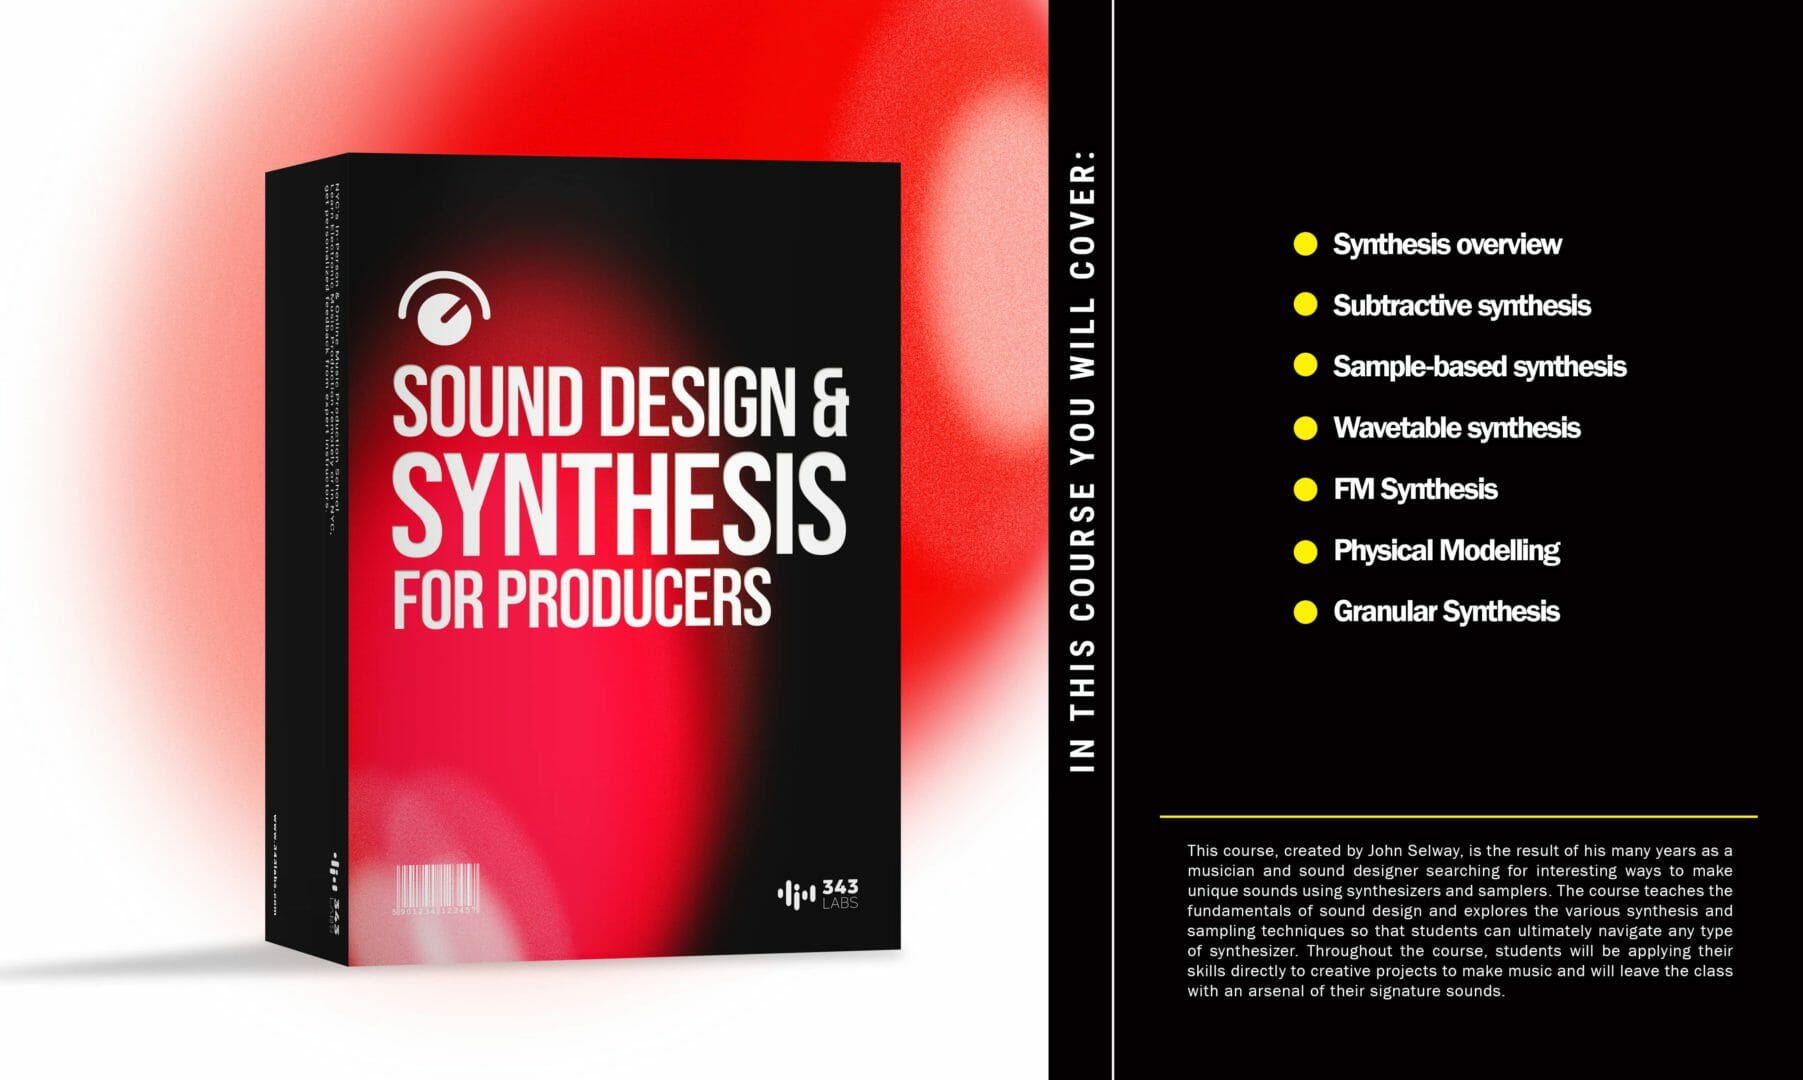 Sound Design and Synthesis [Berlin]